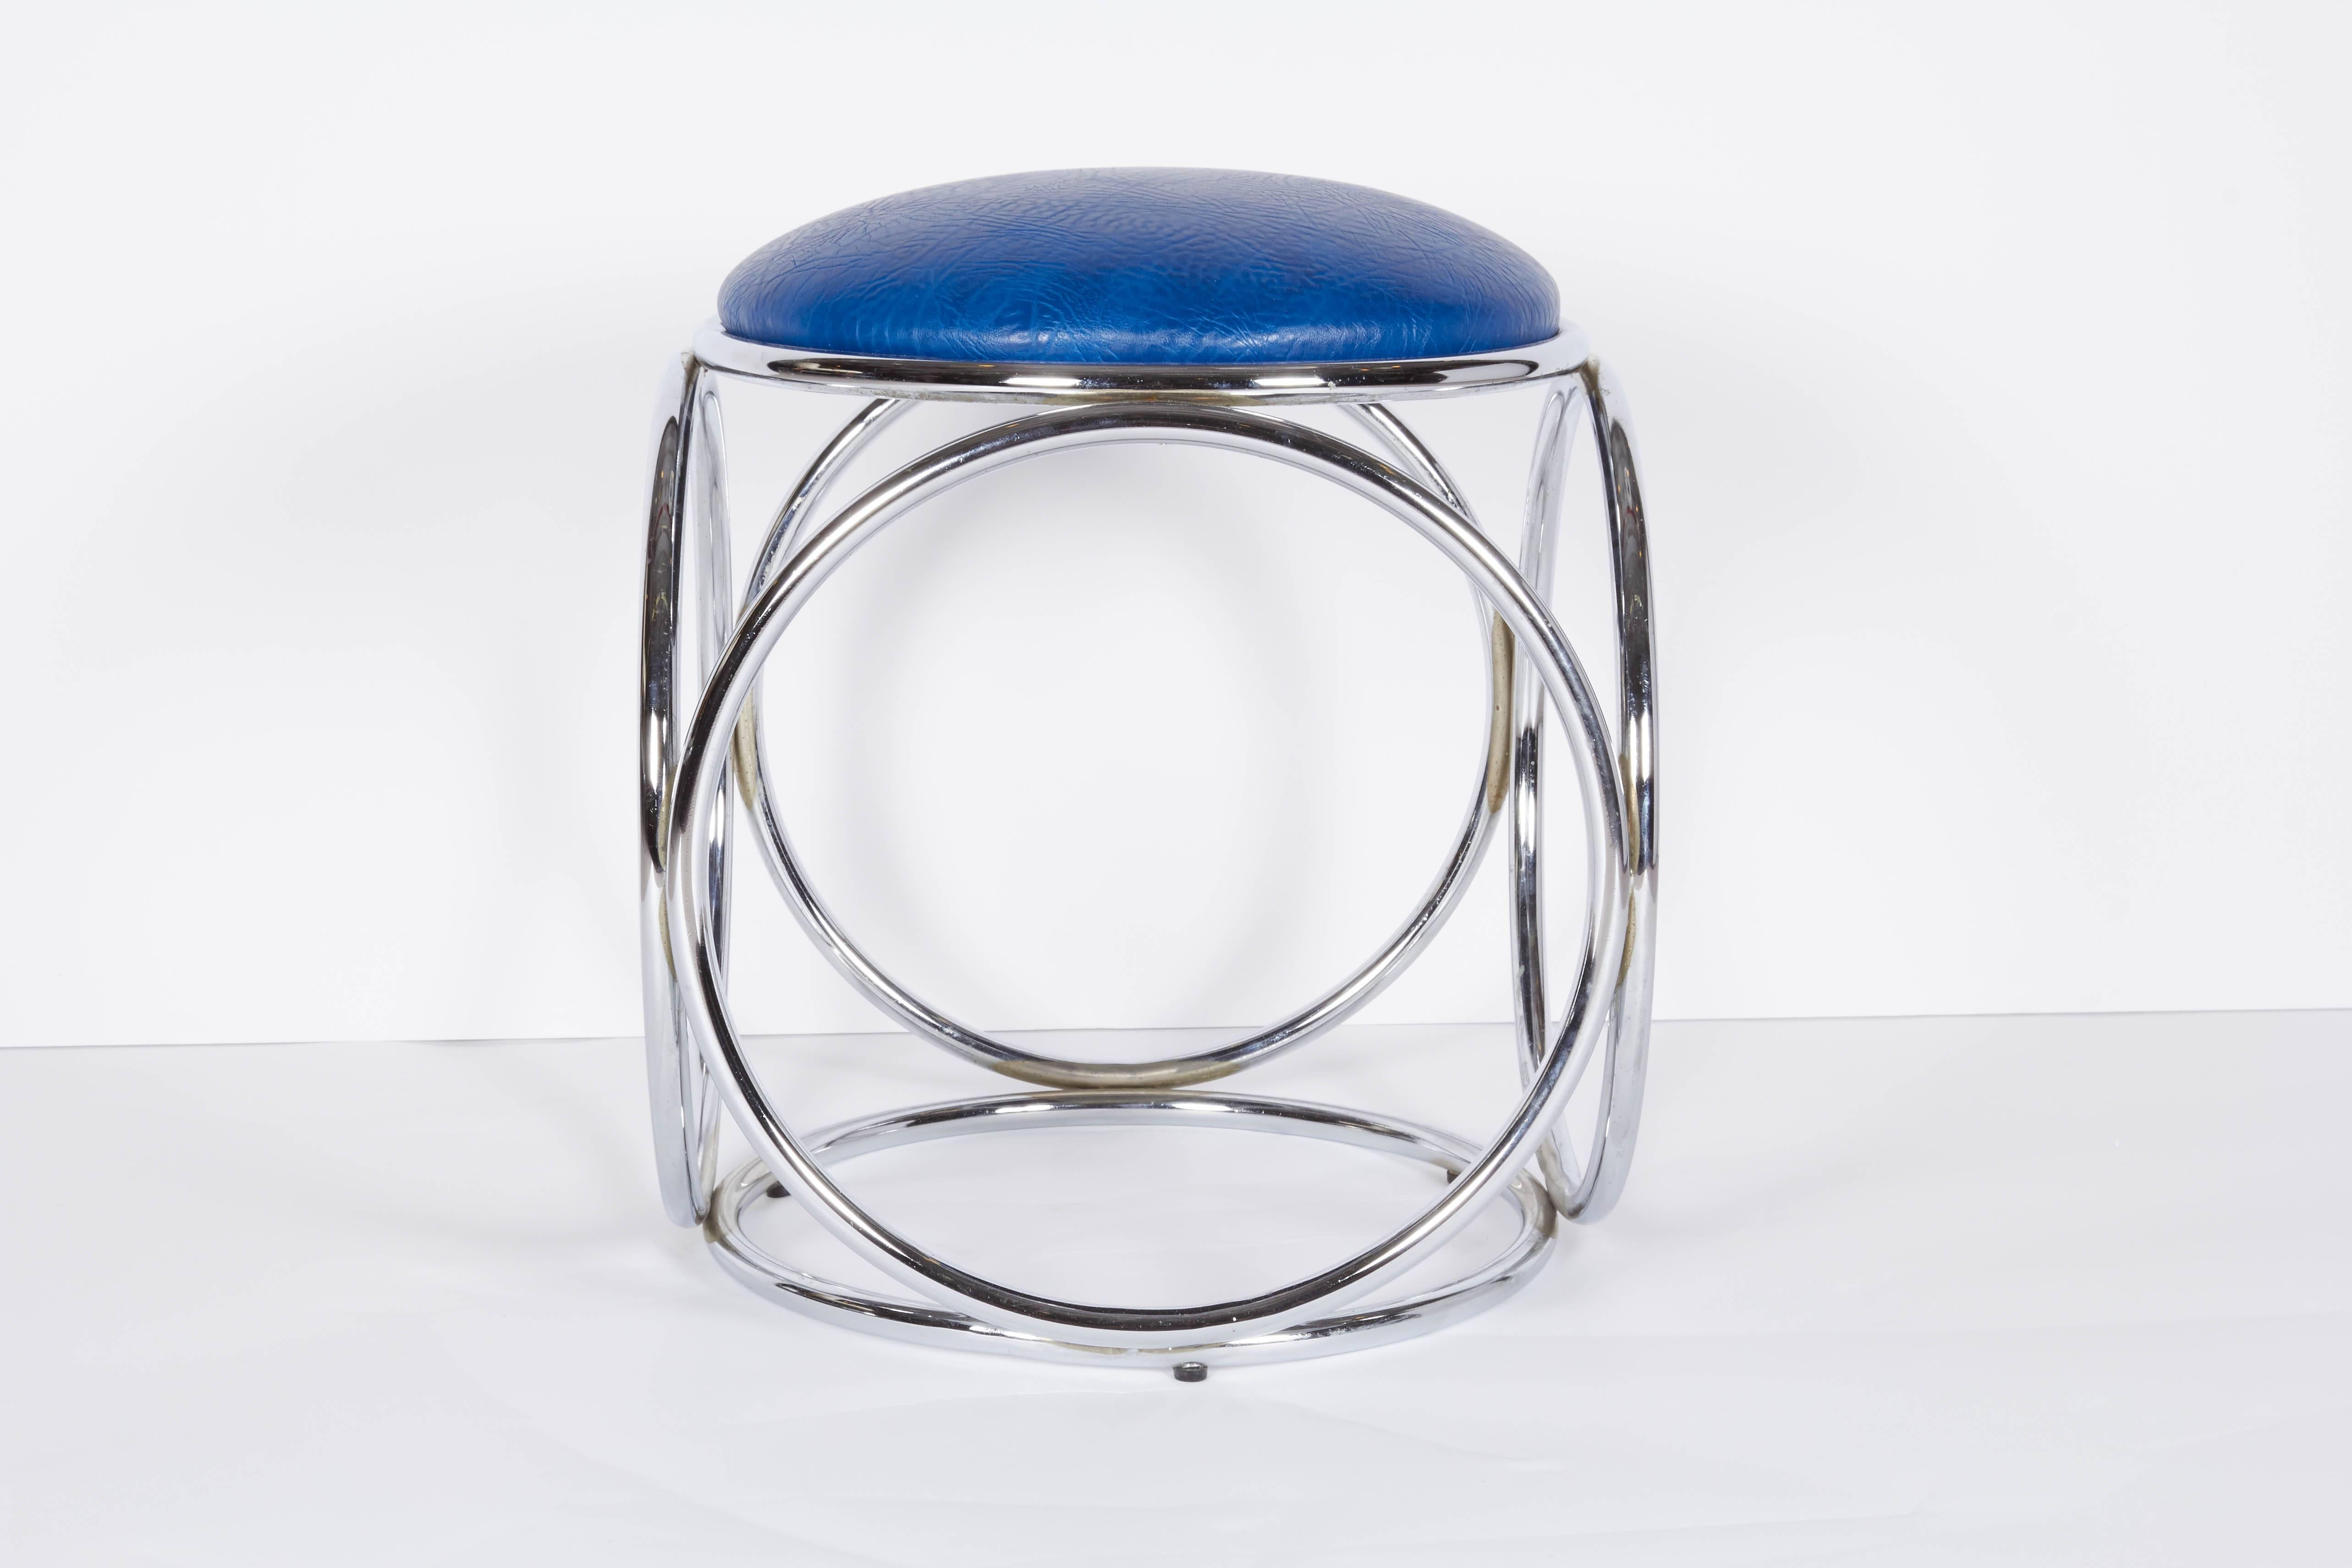 Polished Mid-Century Chrome Stool with Blue Leather Seat